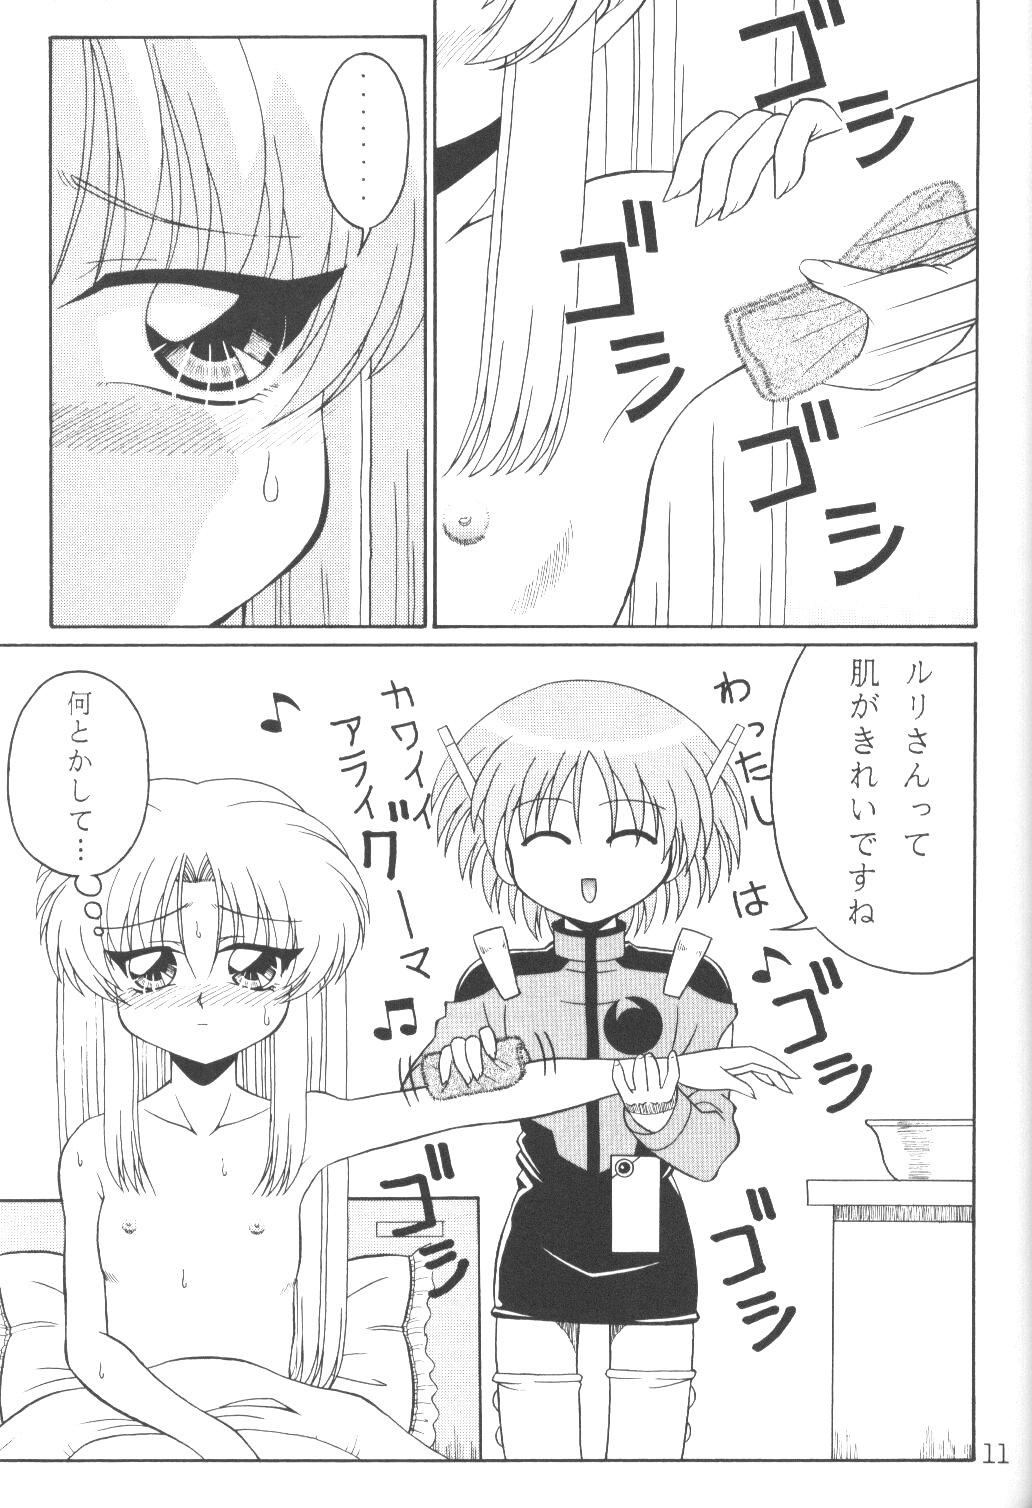 Rough Sex TOKUTEI 8 - To heart Martian successor nadesico Eating - Page 10